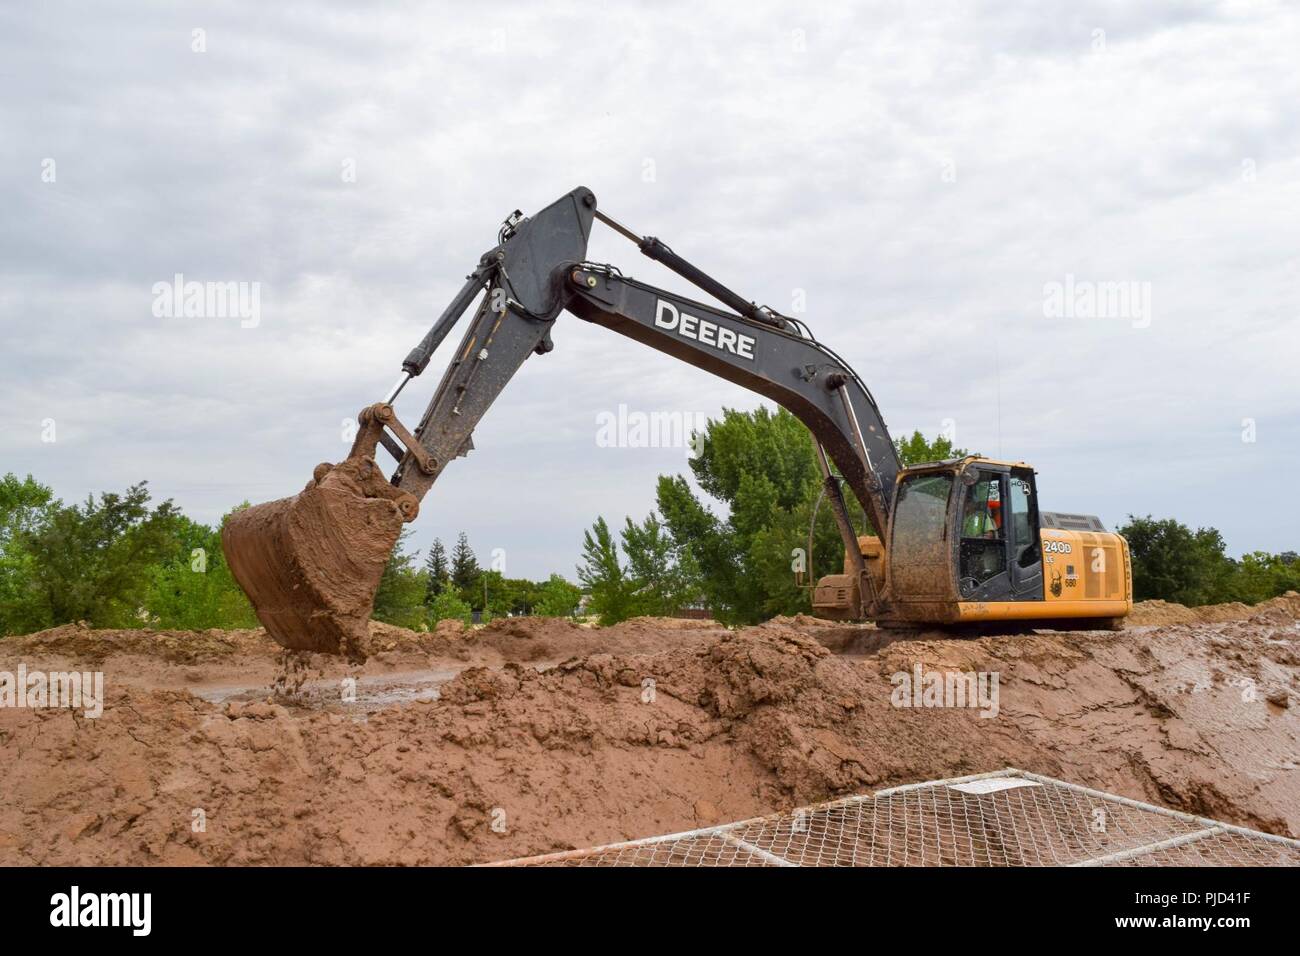 U.S. Army Corps of Engineers Headquarters Senior Program Manager Yvonne Prettyman-Beck visits levee construction sites and flood risk management features in Sacramento, California, July 13, 2018. Stock Photo